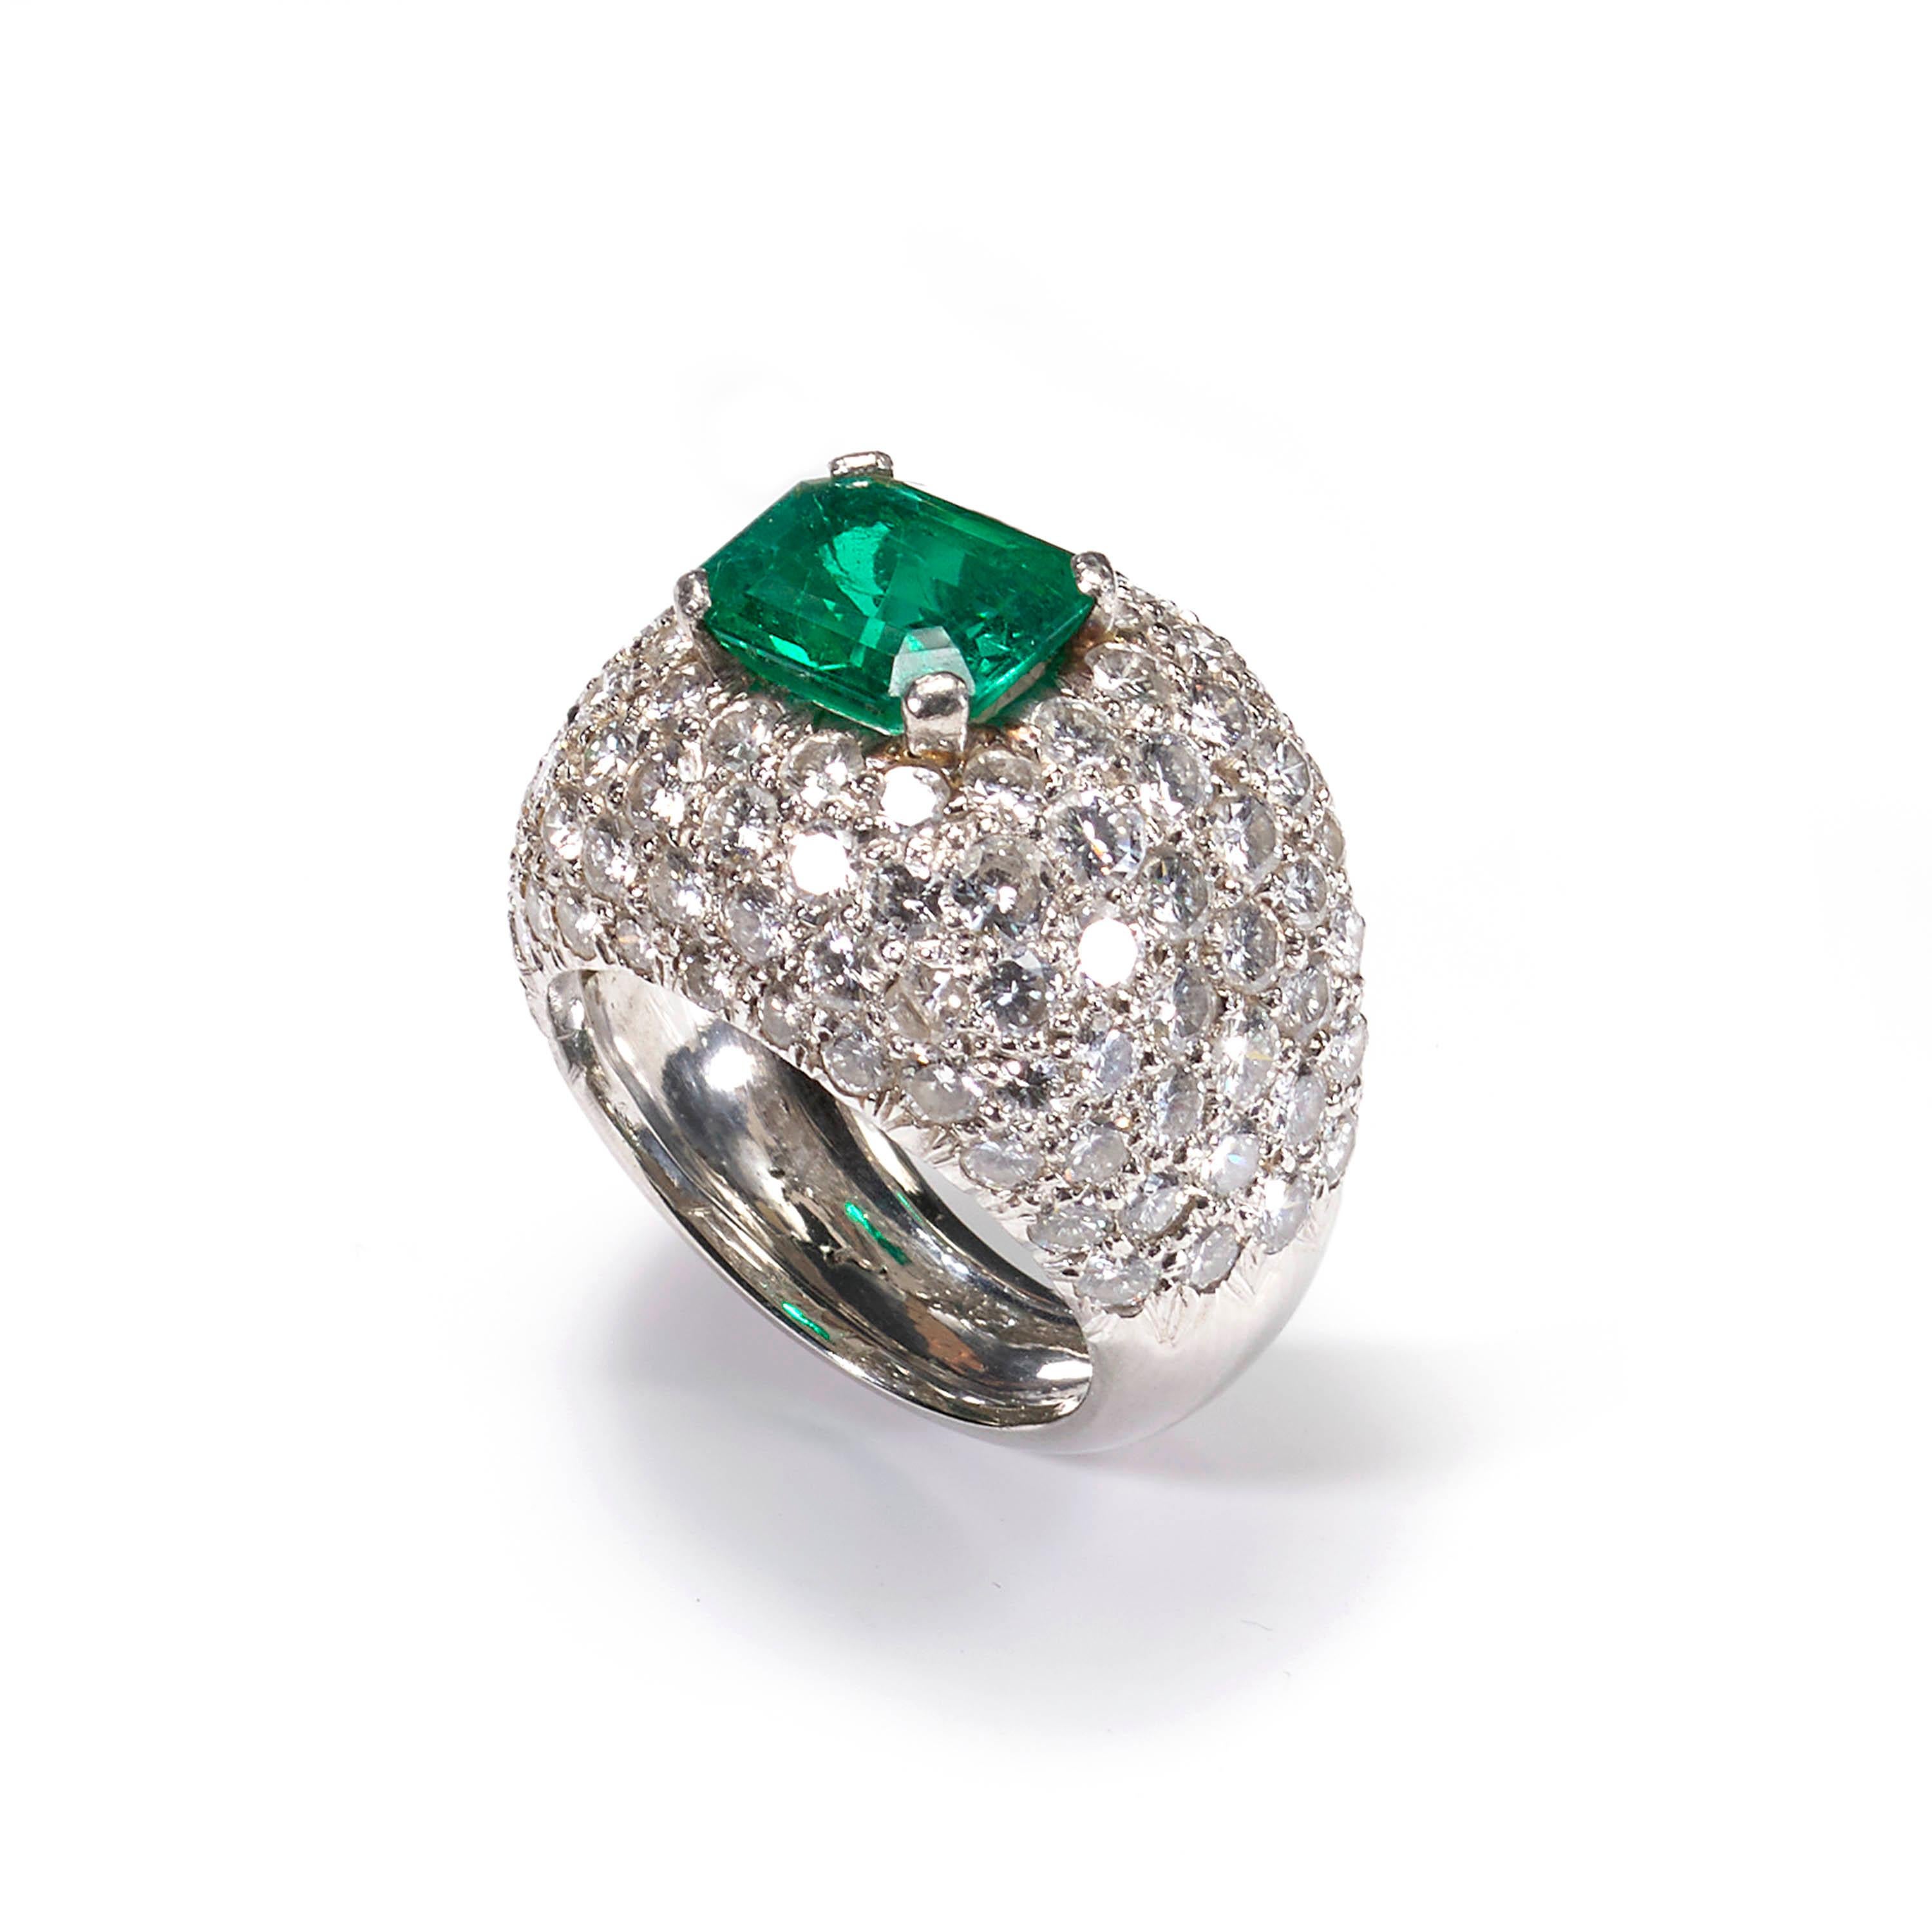 A modern emerald and diamond fancy bombé style ring, centrally claw set with an emerald-cut emerald, weighing an estimated 2.40 carats, surrounded by brilliant-cut diamonds in a pavé setting, weighing an estimated total of 6.00 carats, all mounted